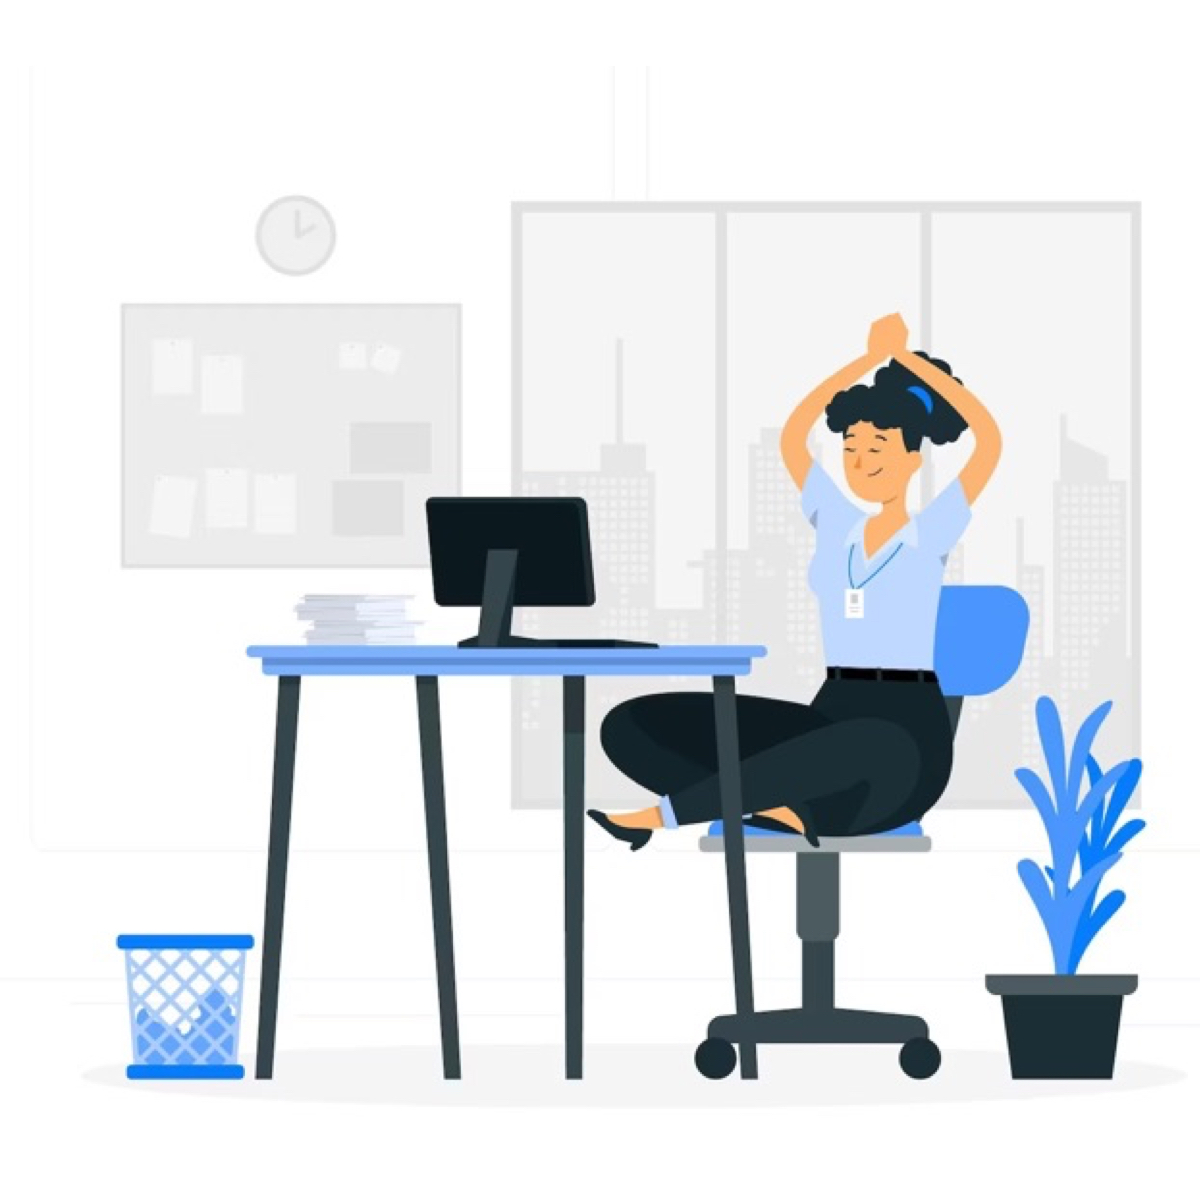 Exercises for Your Workplace Desk